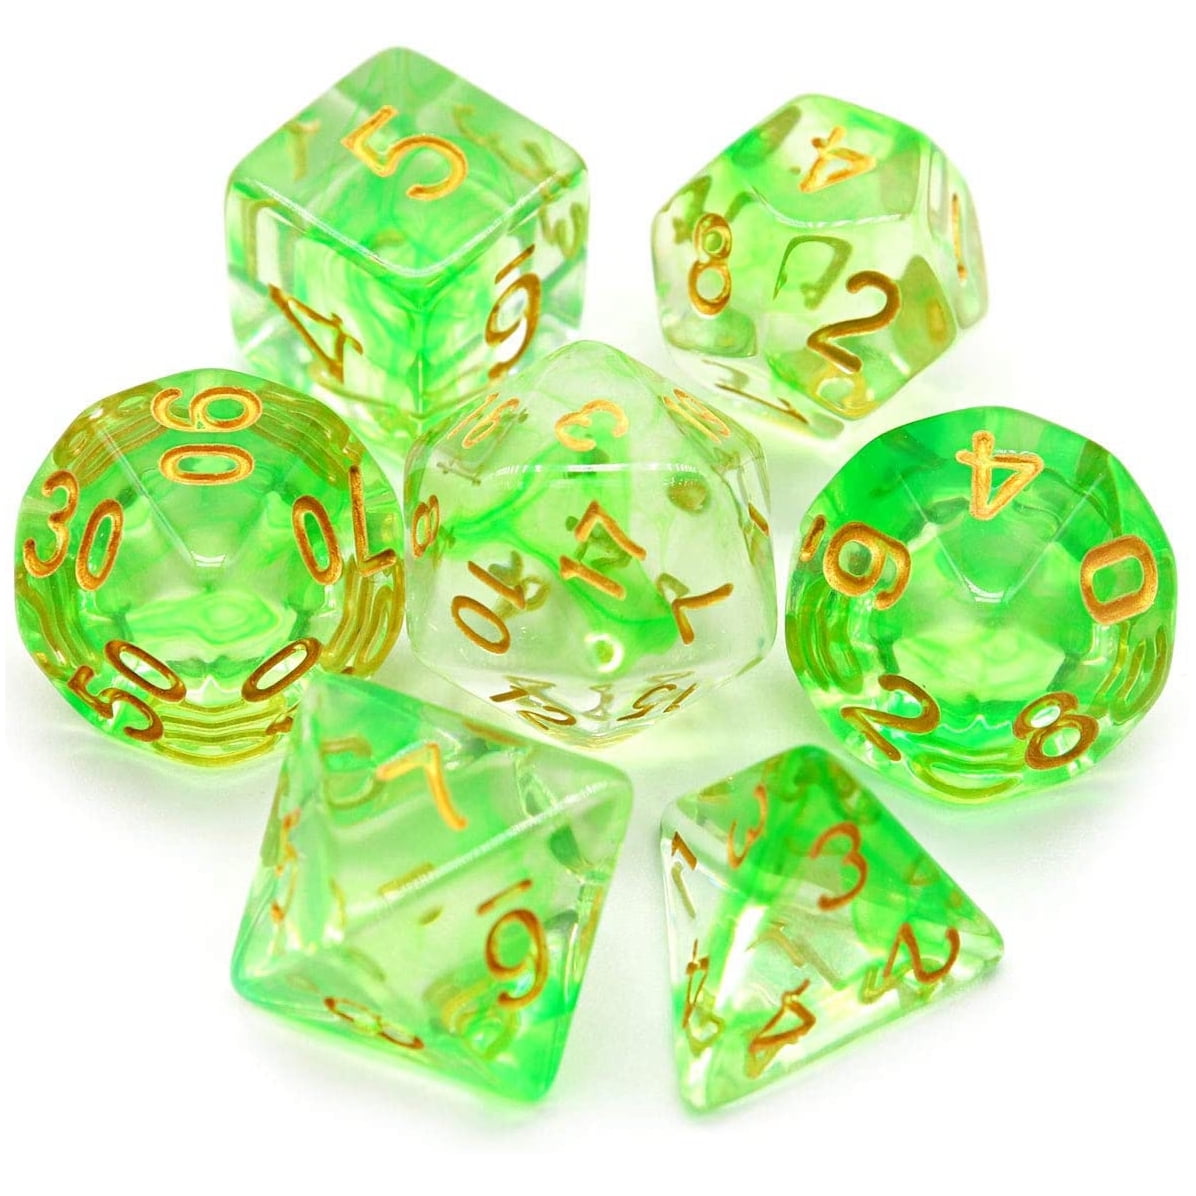 Lot 10 pcs Twenty Sided Dice D20 Playing D&D RPG Party Games Dices Green 